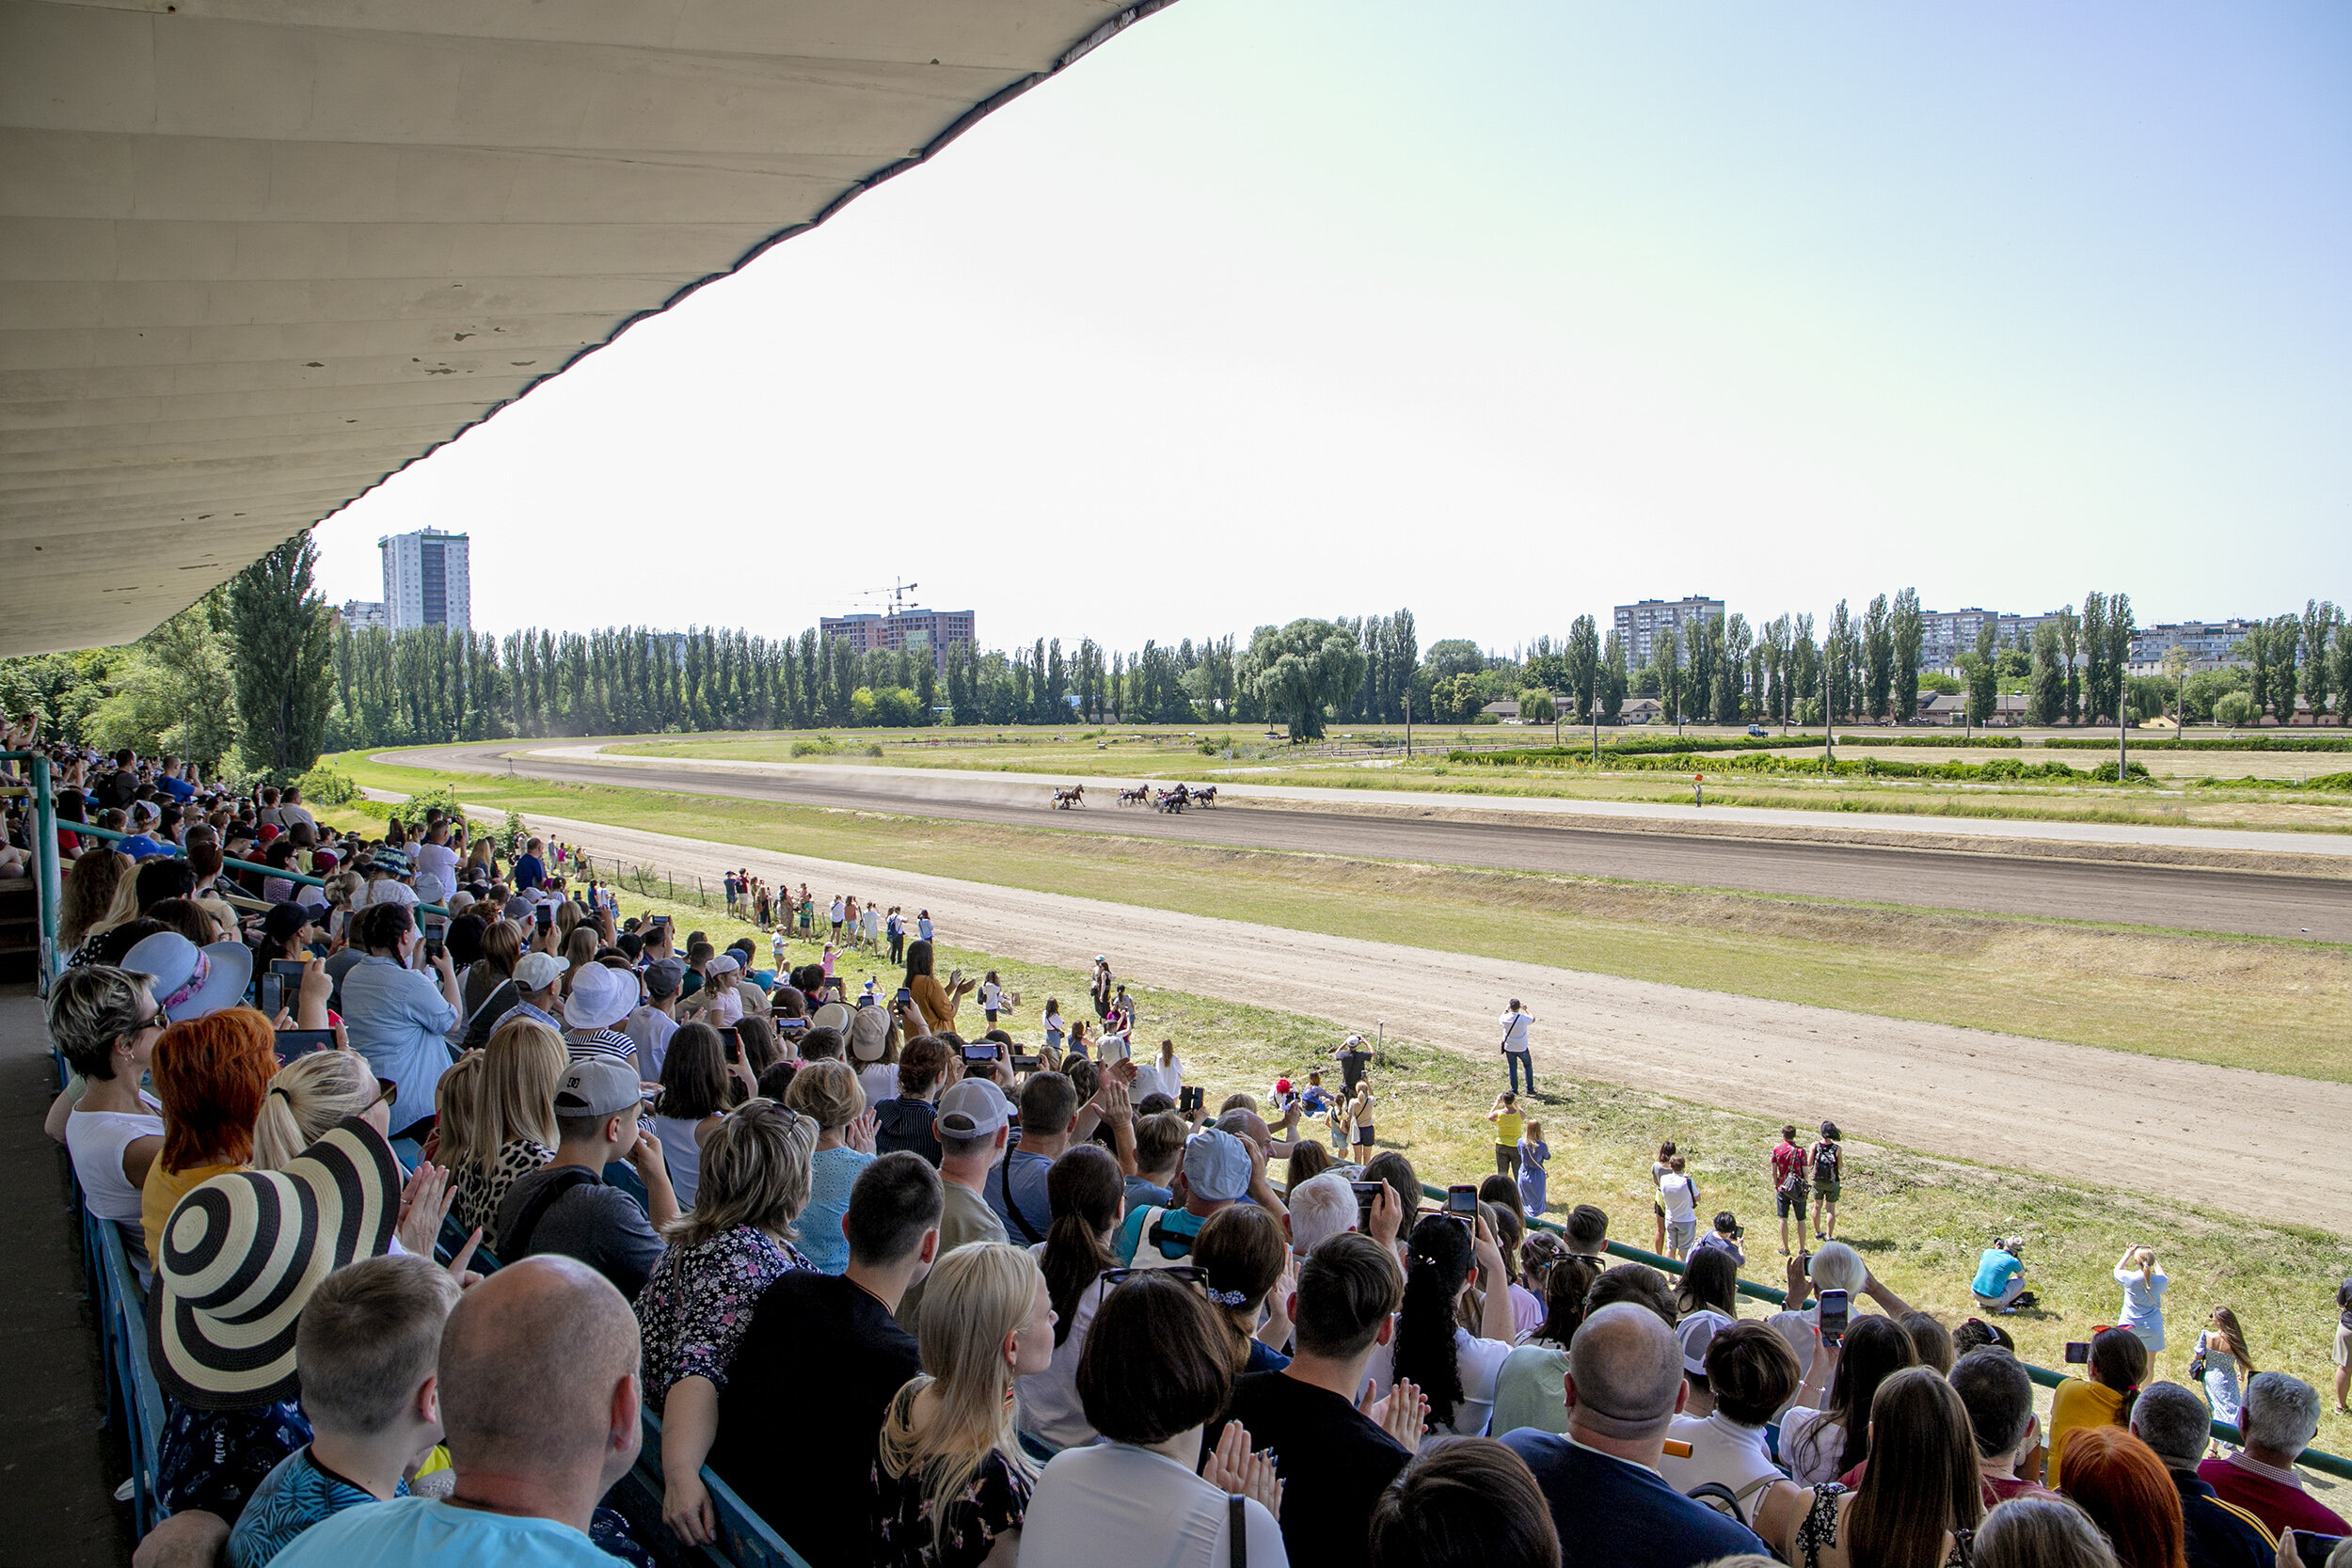 Kyiv Hippodrome on June 19, 2022.  
Photo taken from the Official Portal of Kyiv